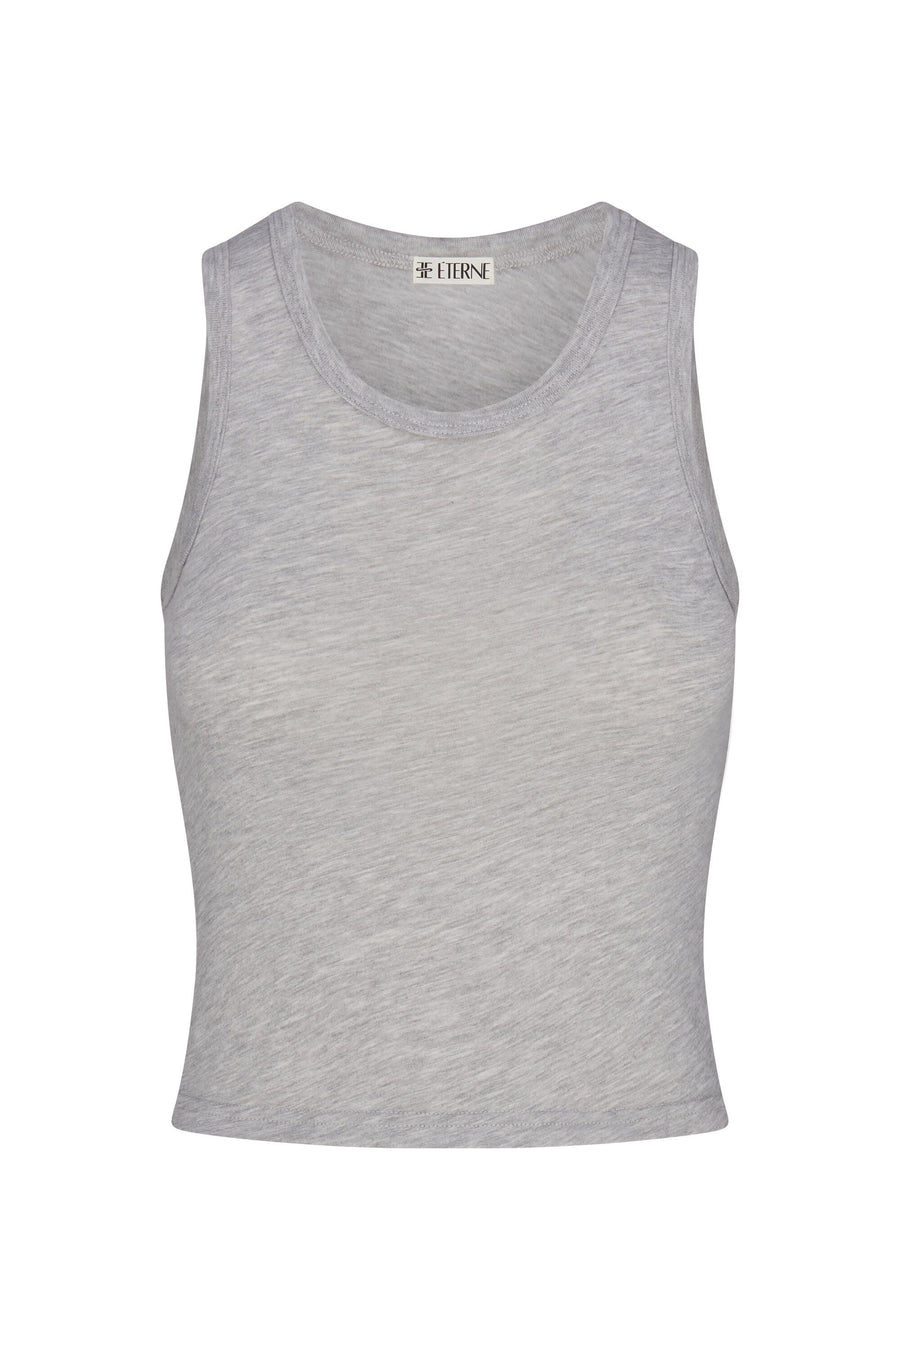 Fitted Tank Heather Grey TOPS ÉTERNE 